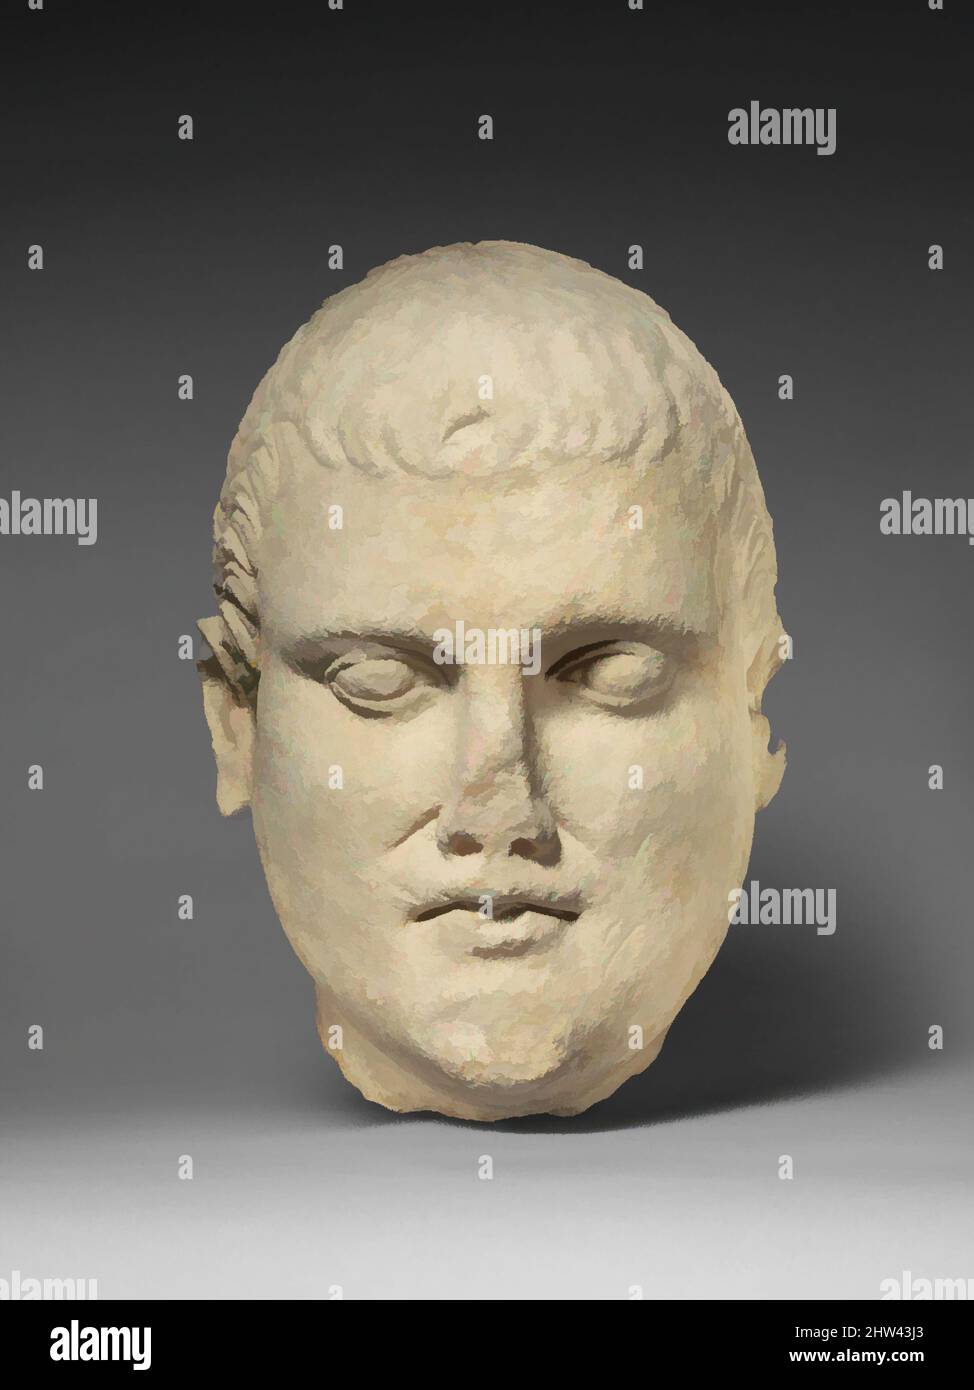 Art inspired by Limestone head of beardless male votary, Hellenistic, early 1st century B.C., Cypriot, Limestone, 10 7/8 x 8 1/4 x 7 in. (27.6 x 21 x 17.8 cm), Stone Sculpture, The lower portion of the face is heavy, the chin juts out. The half-open mouth has a severe expression. The, Classic works modernized by Artotop with a splash of modernity. Shapes, color and value, eye-catching visual impact on art. Emotions through freedom of artworks in a contemporary way. A timeless message pursuing a wildly creative new direction. Artists turning to the digital medium and creating the Artotop NFT Stock Photo